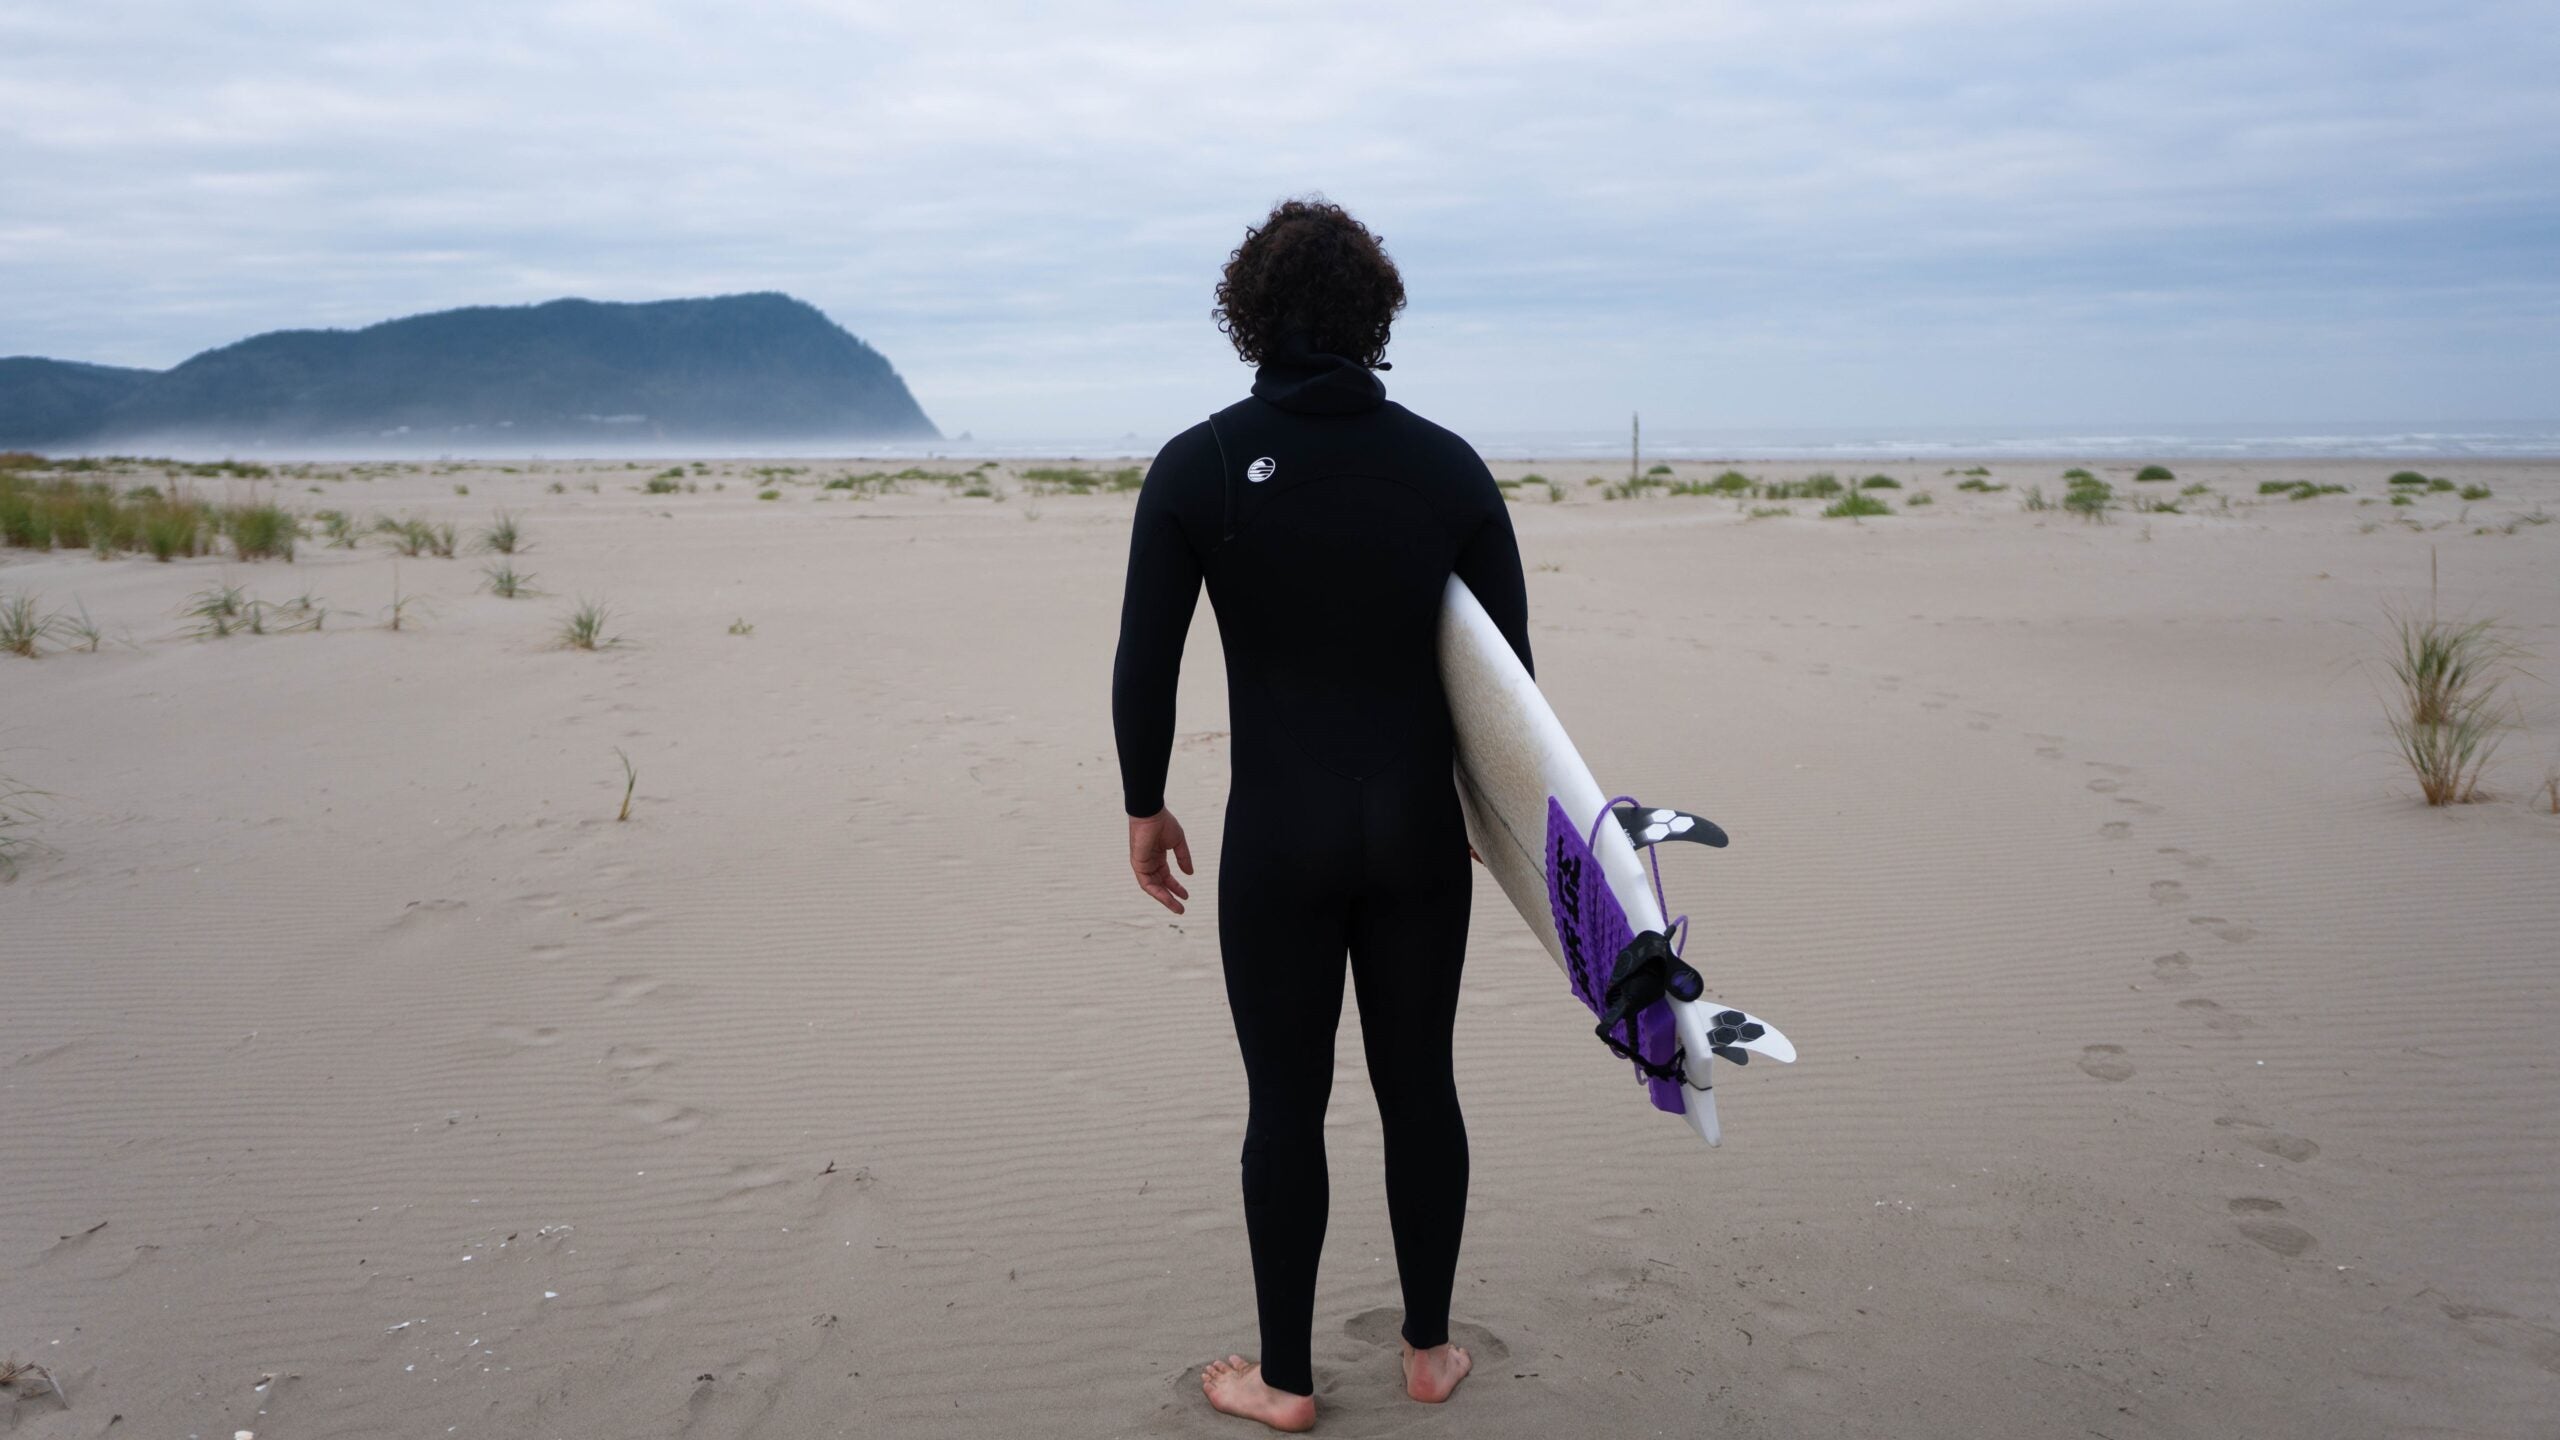 The Wetsuit Guide: Wetsuit Sizing and Fit – Cleanline Surf